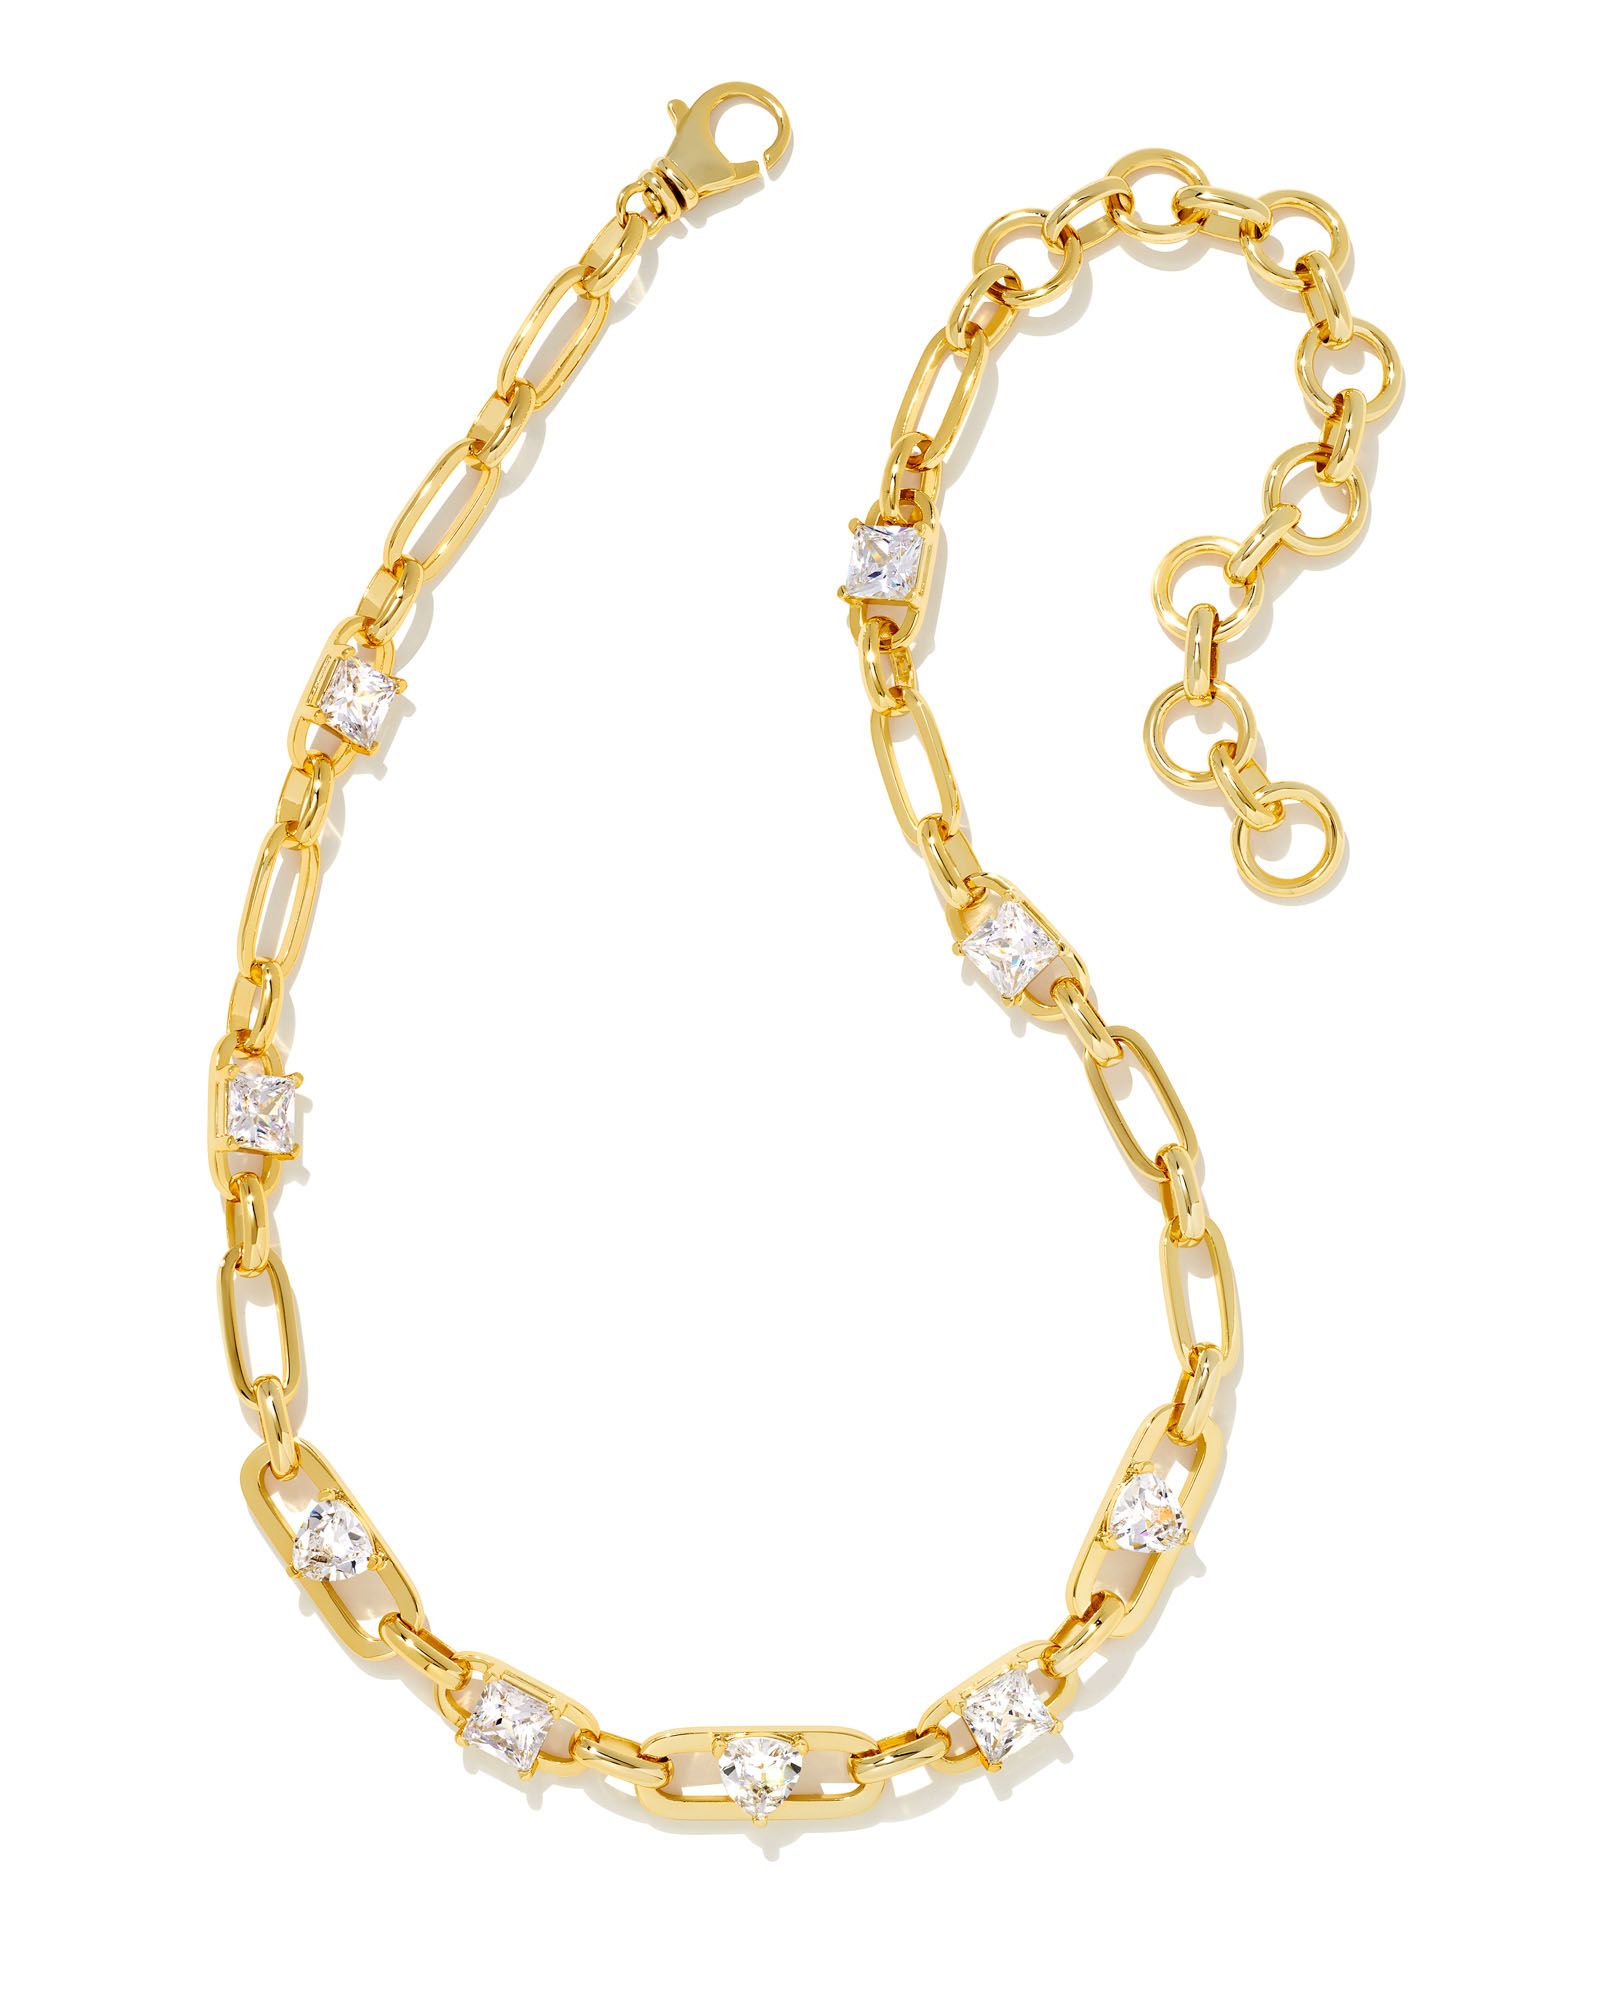 Blair Gold Jewel Chain Necklace in White Crystal | Kendra Scott